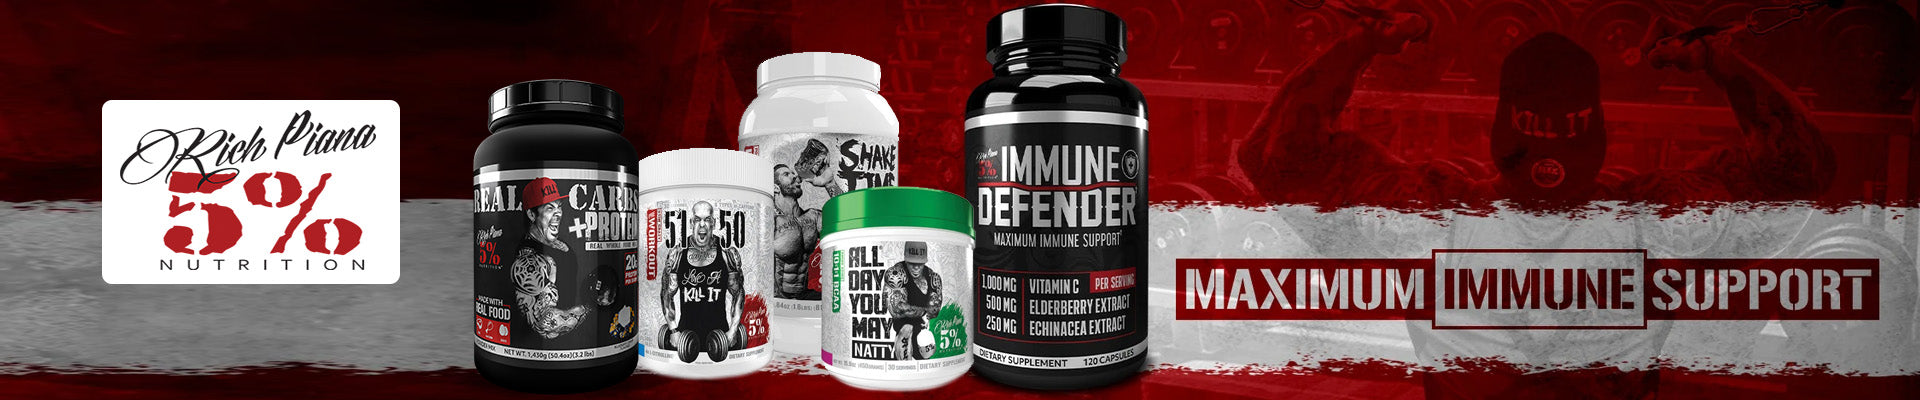 5% Nutrition Supplements